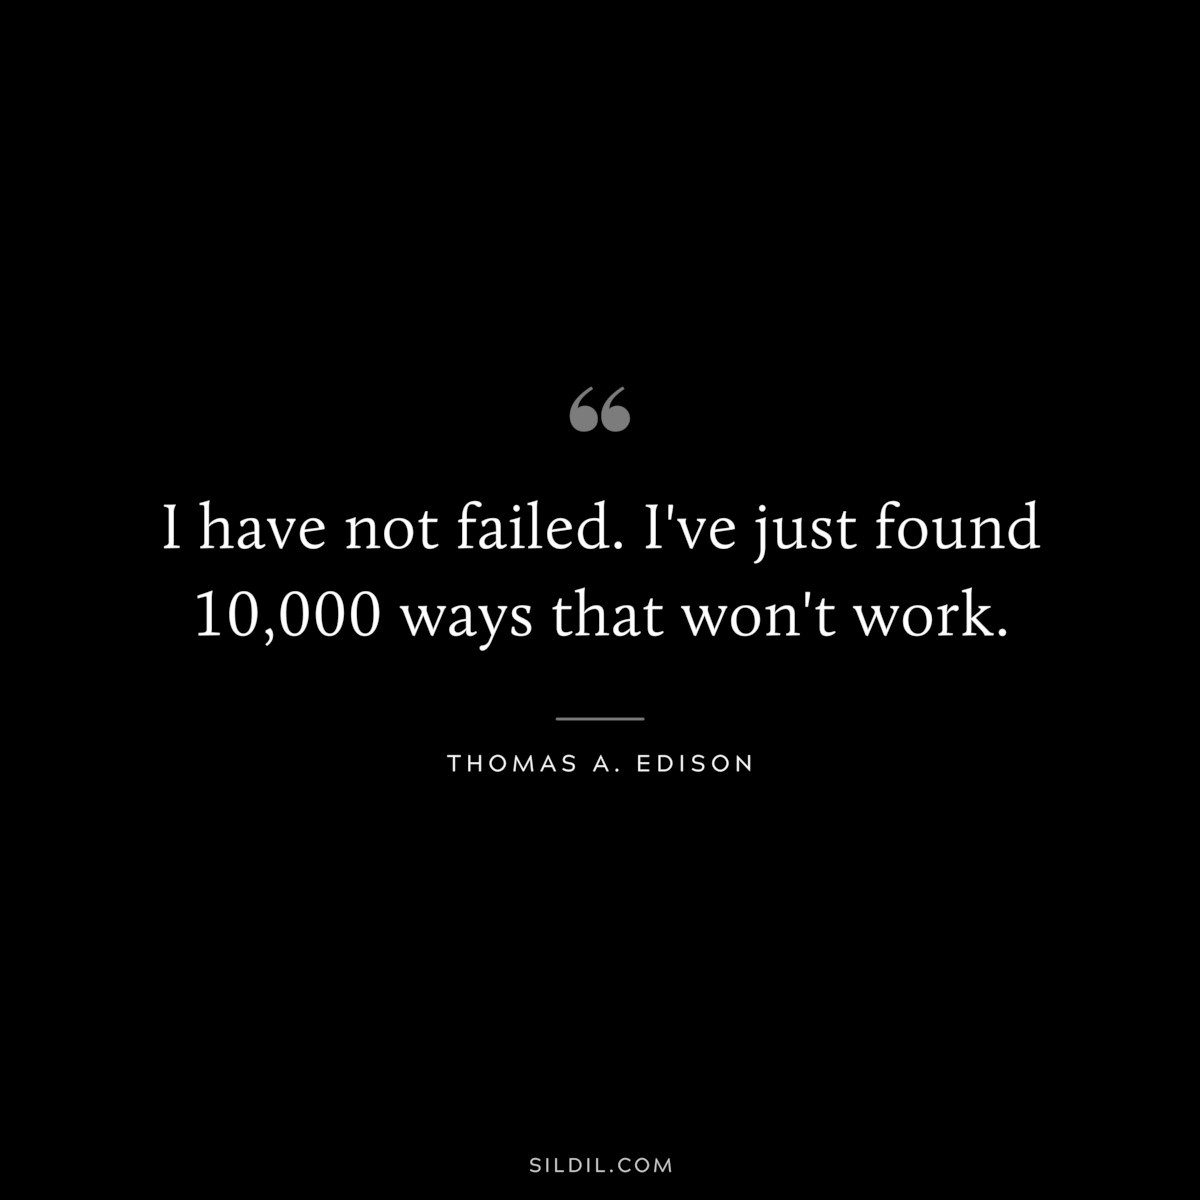 I have not failed. I've just found 10,000 ways that won't work. ― Thomas A. Edison